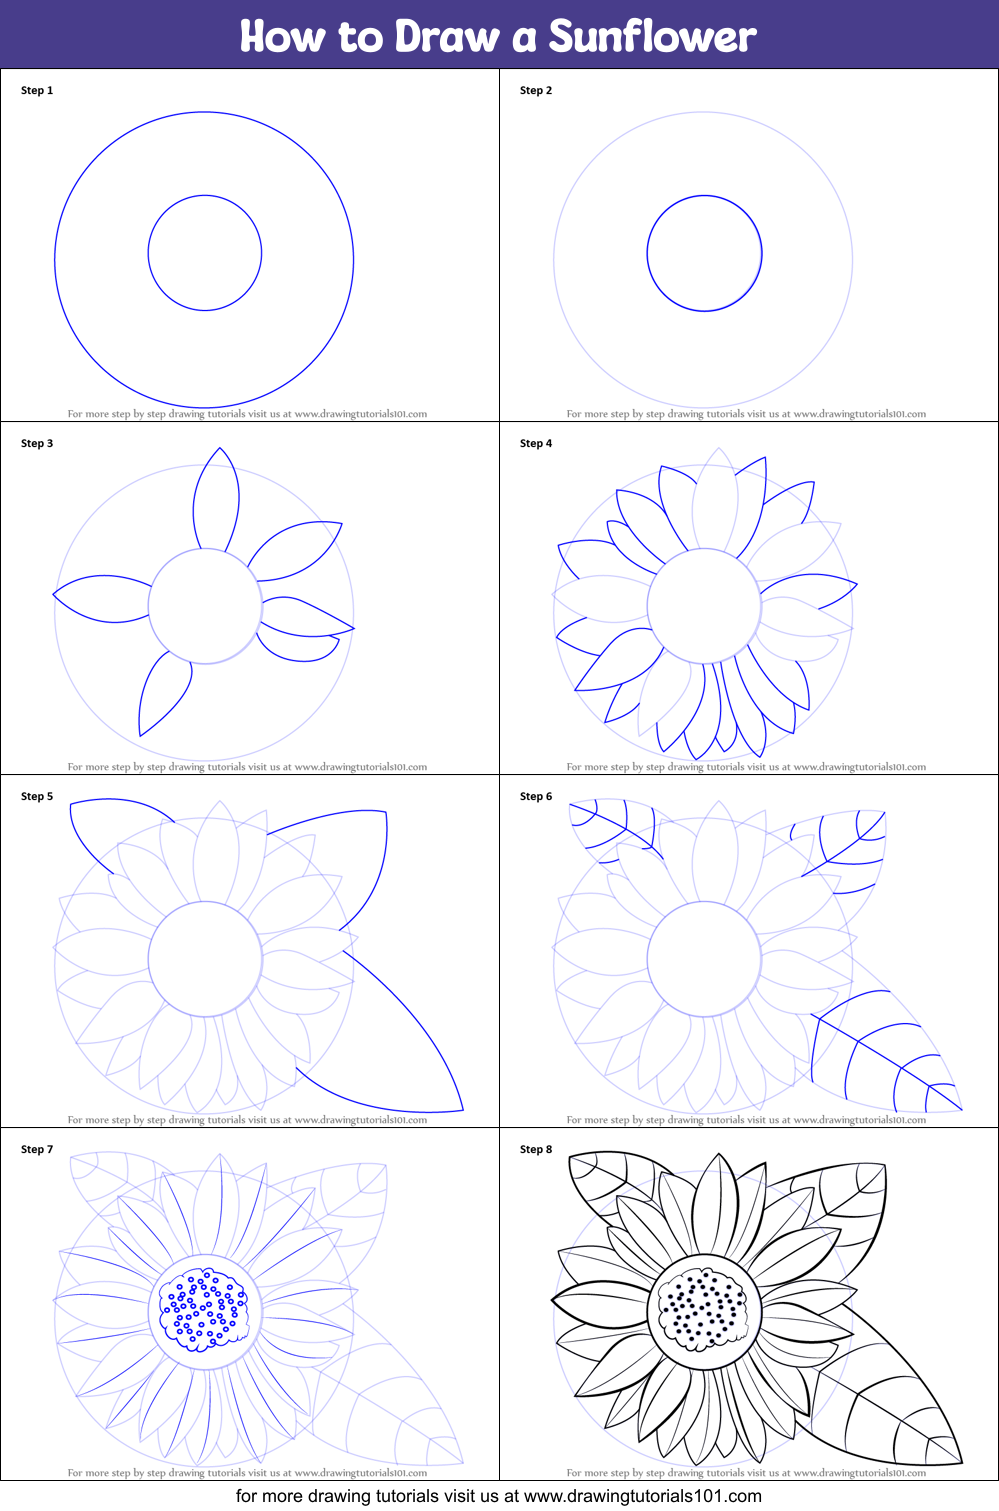 How to Draw a Sunflower printable step by step drawing